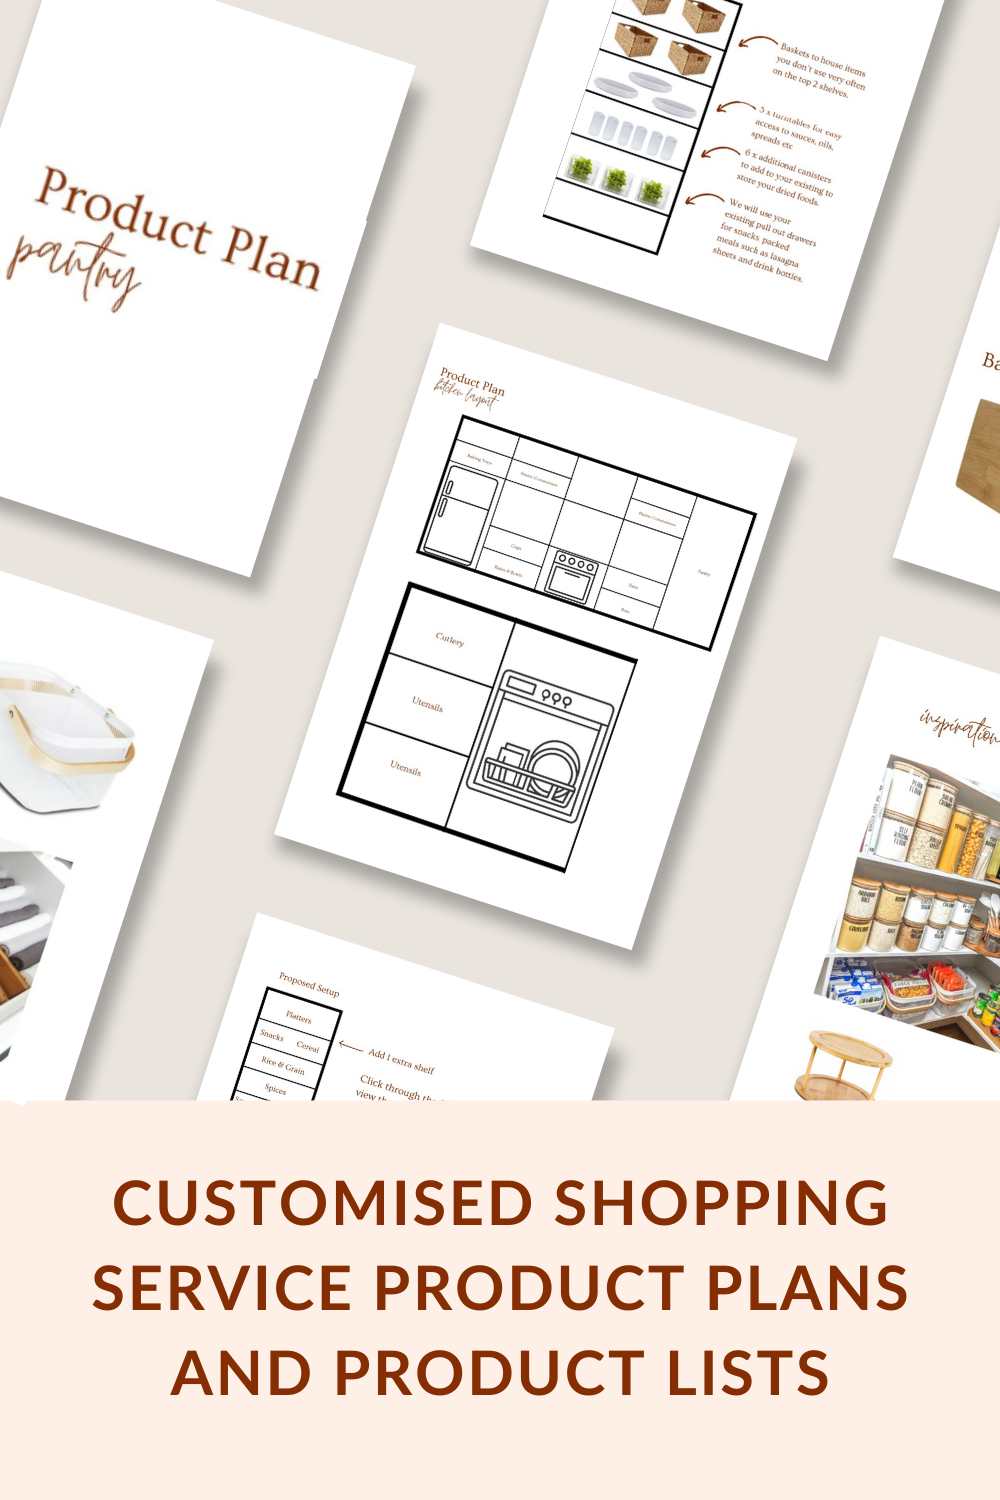 Customised Shopping Service Product Plans and Product Lists